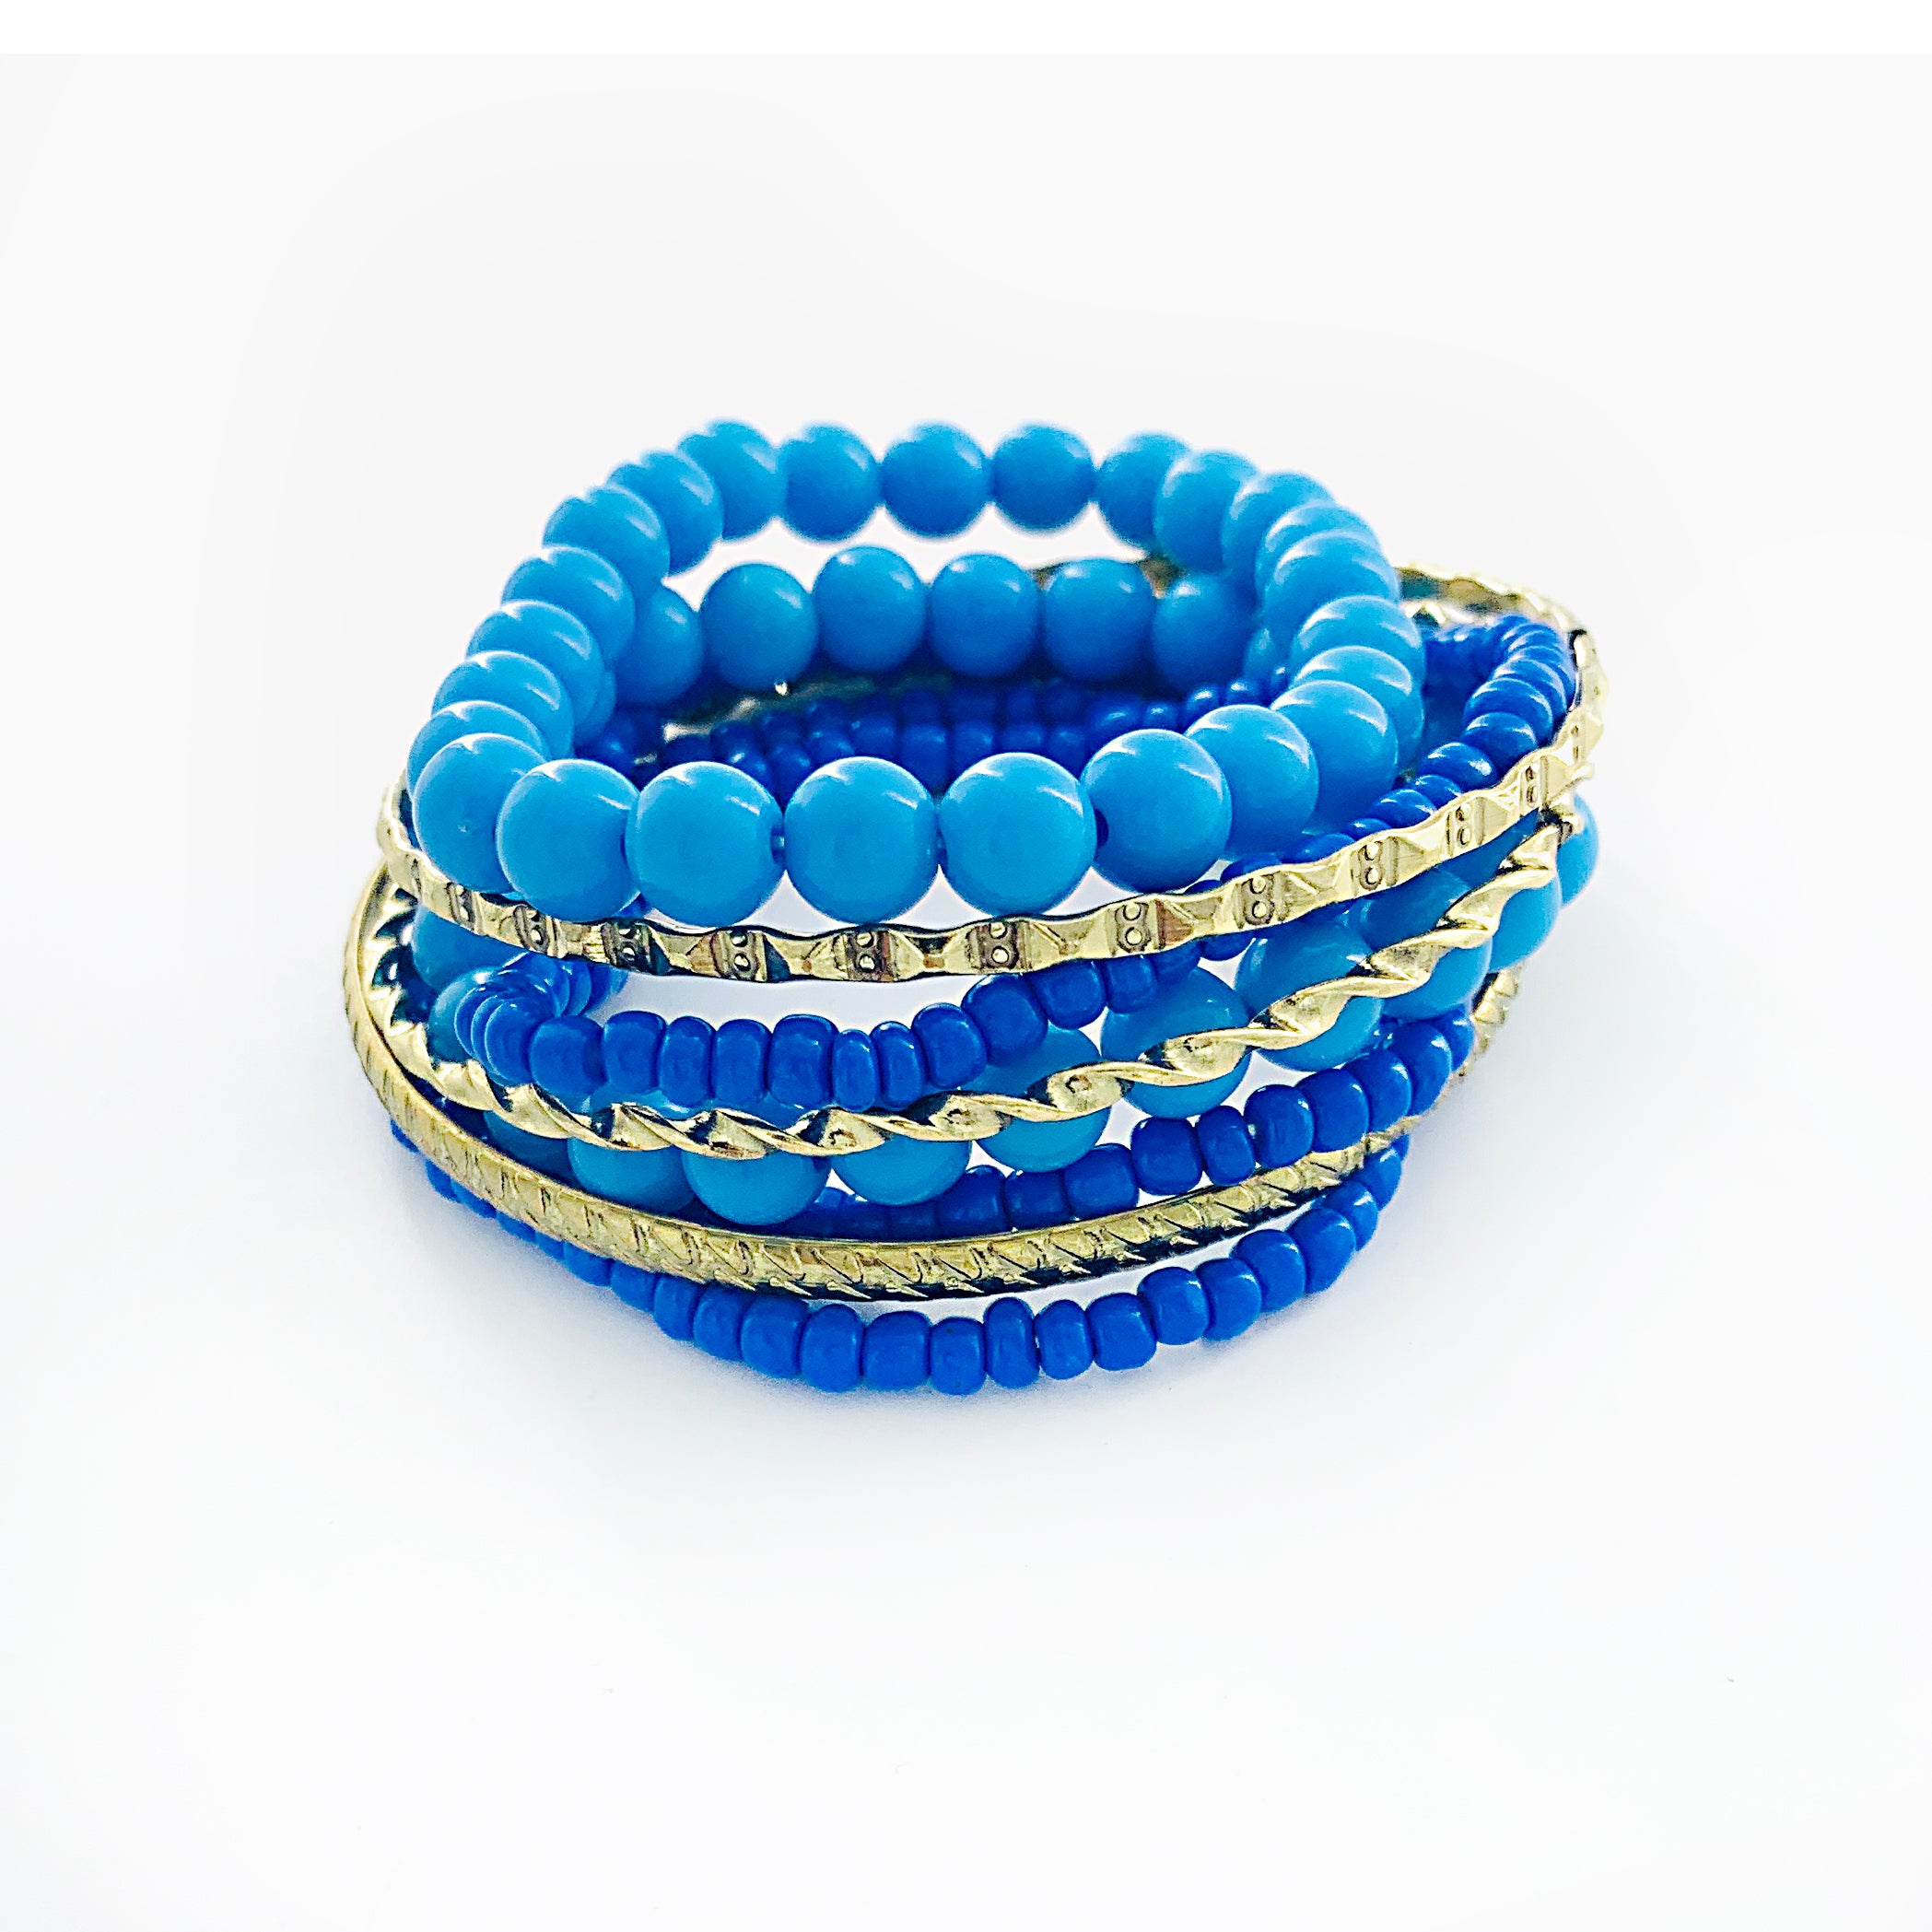 Blue beaded bracelets with gold bangles